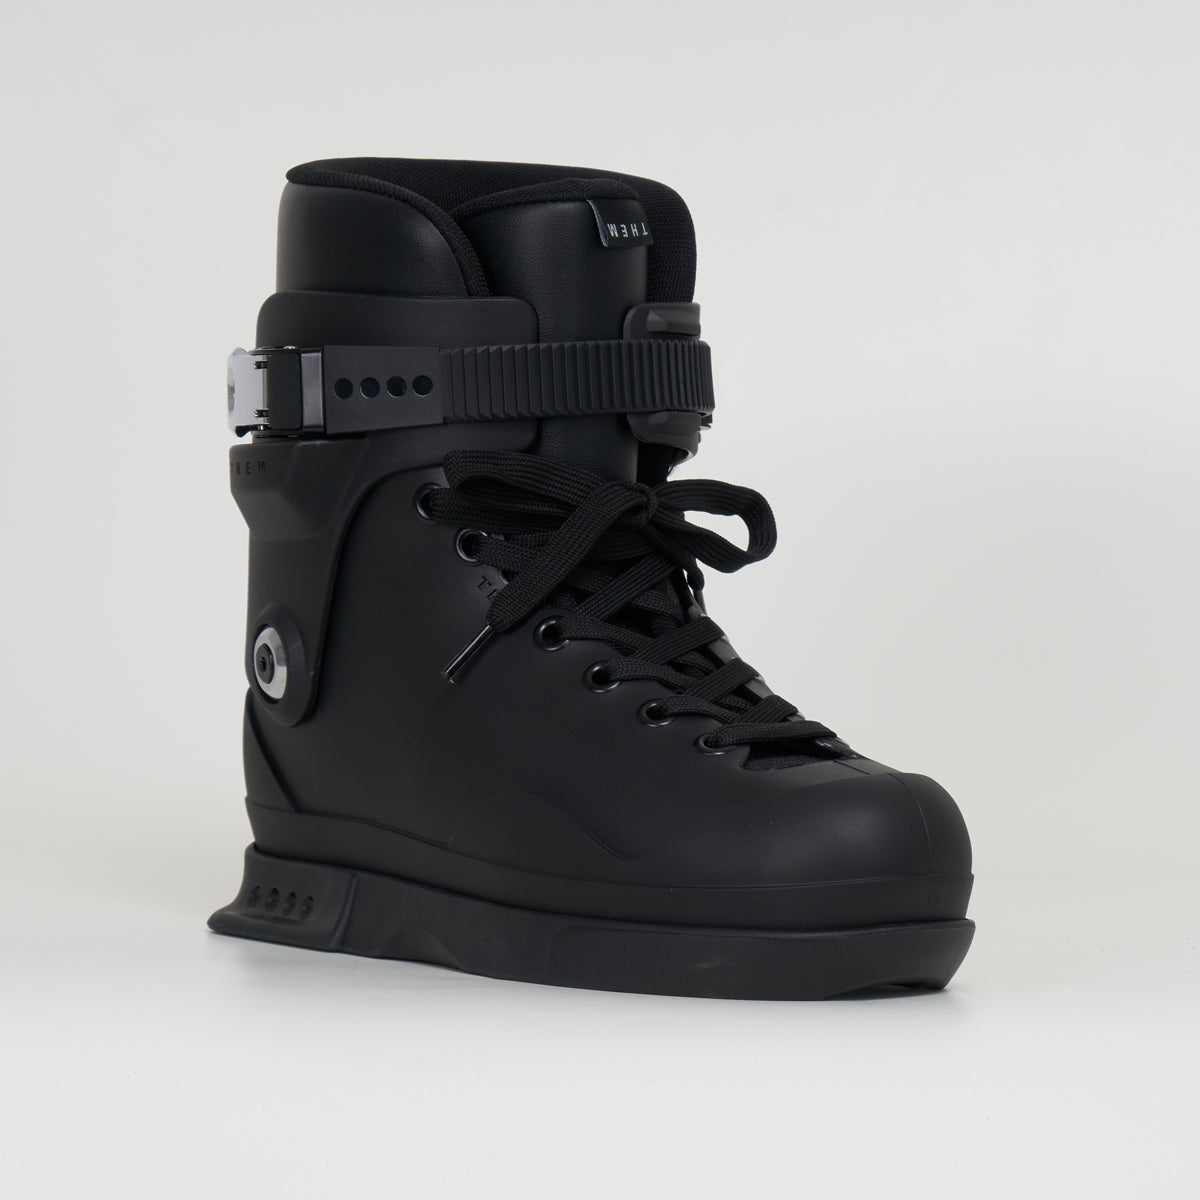 Them 909 Skates BOOT ONLY Black - With Them Liner, V.3 Soulplate and NEW SHELL SIZES